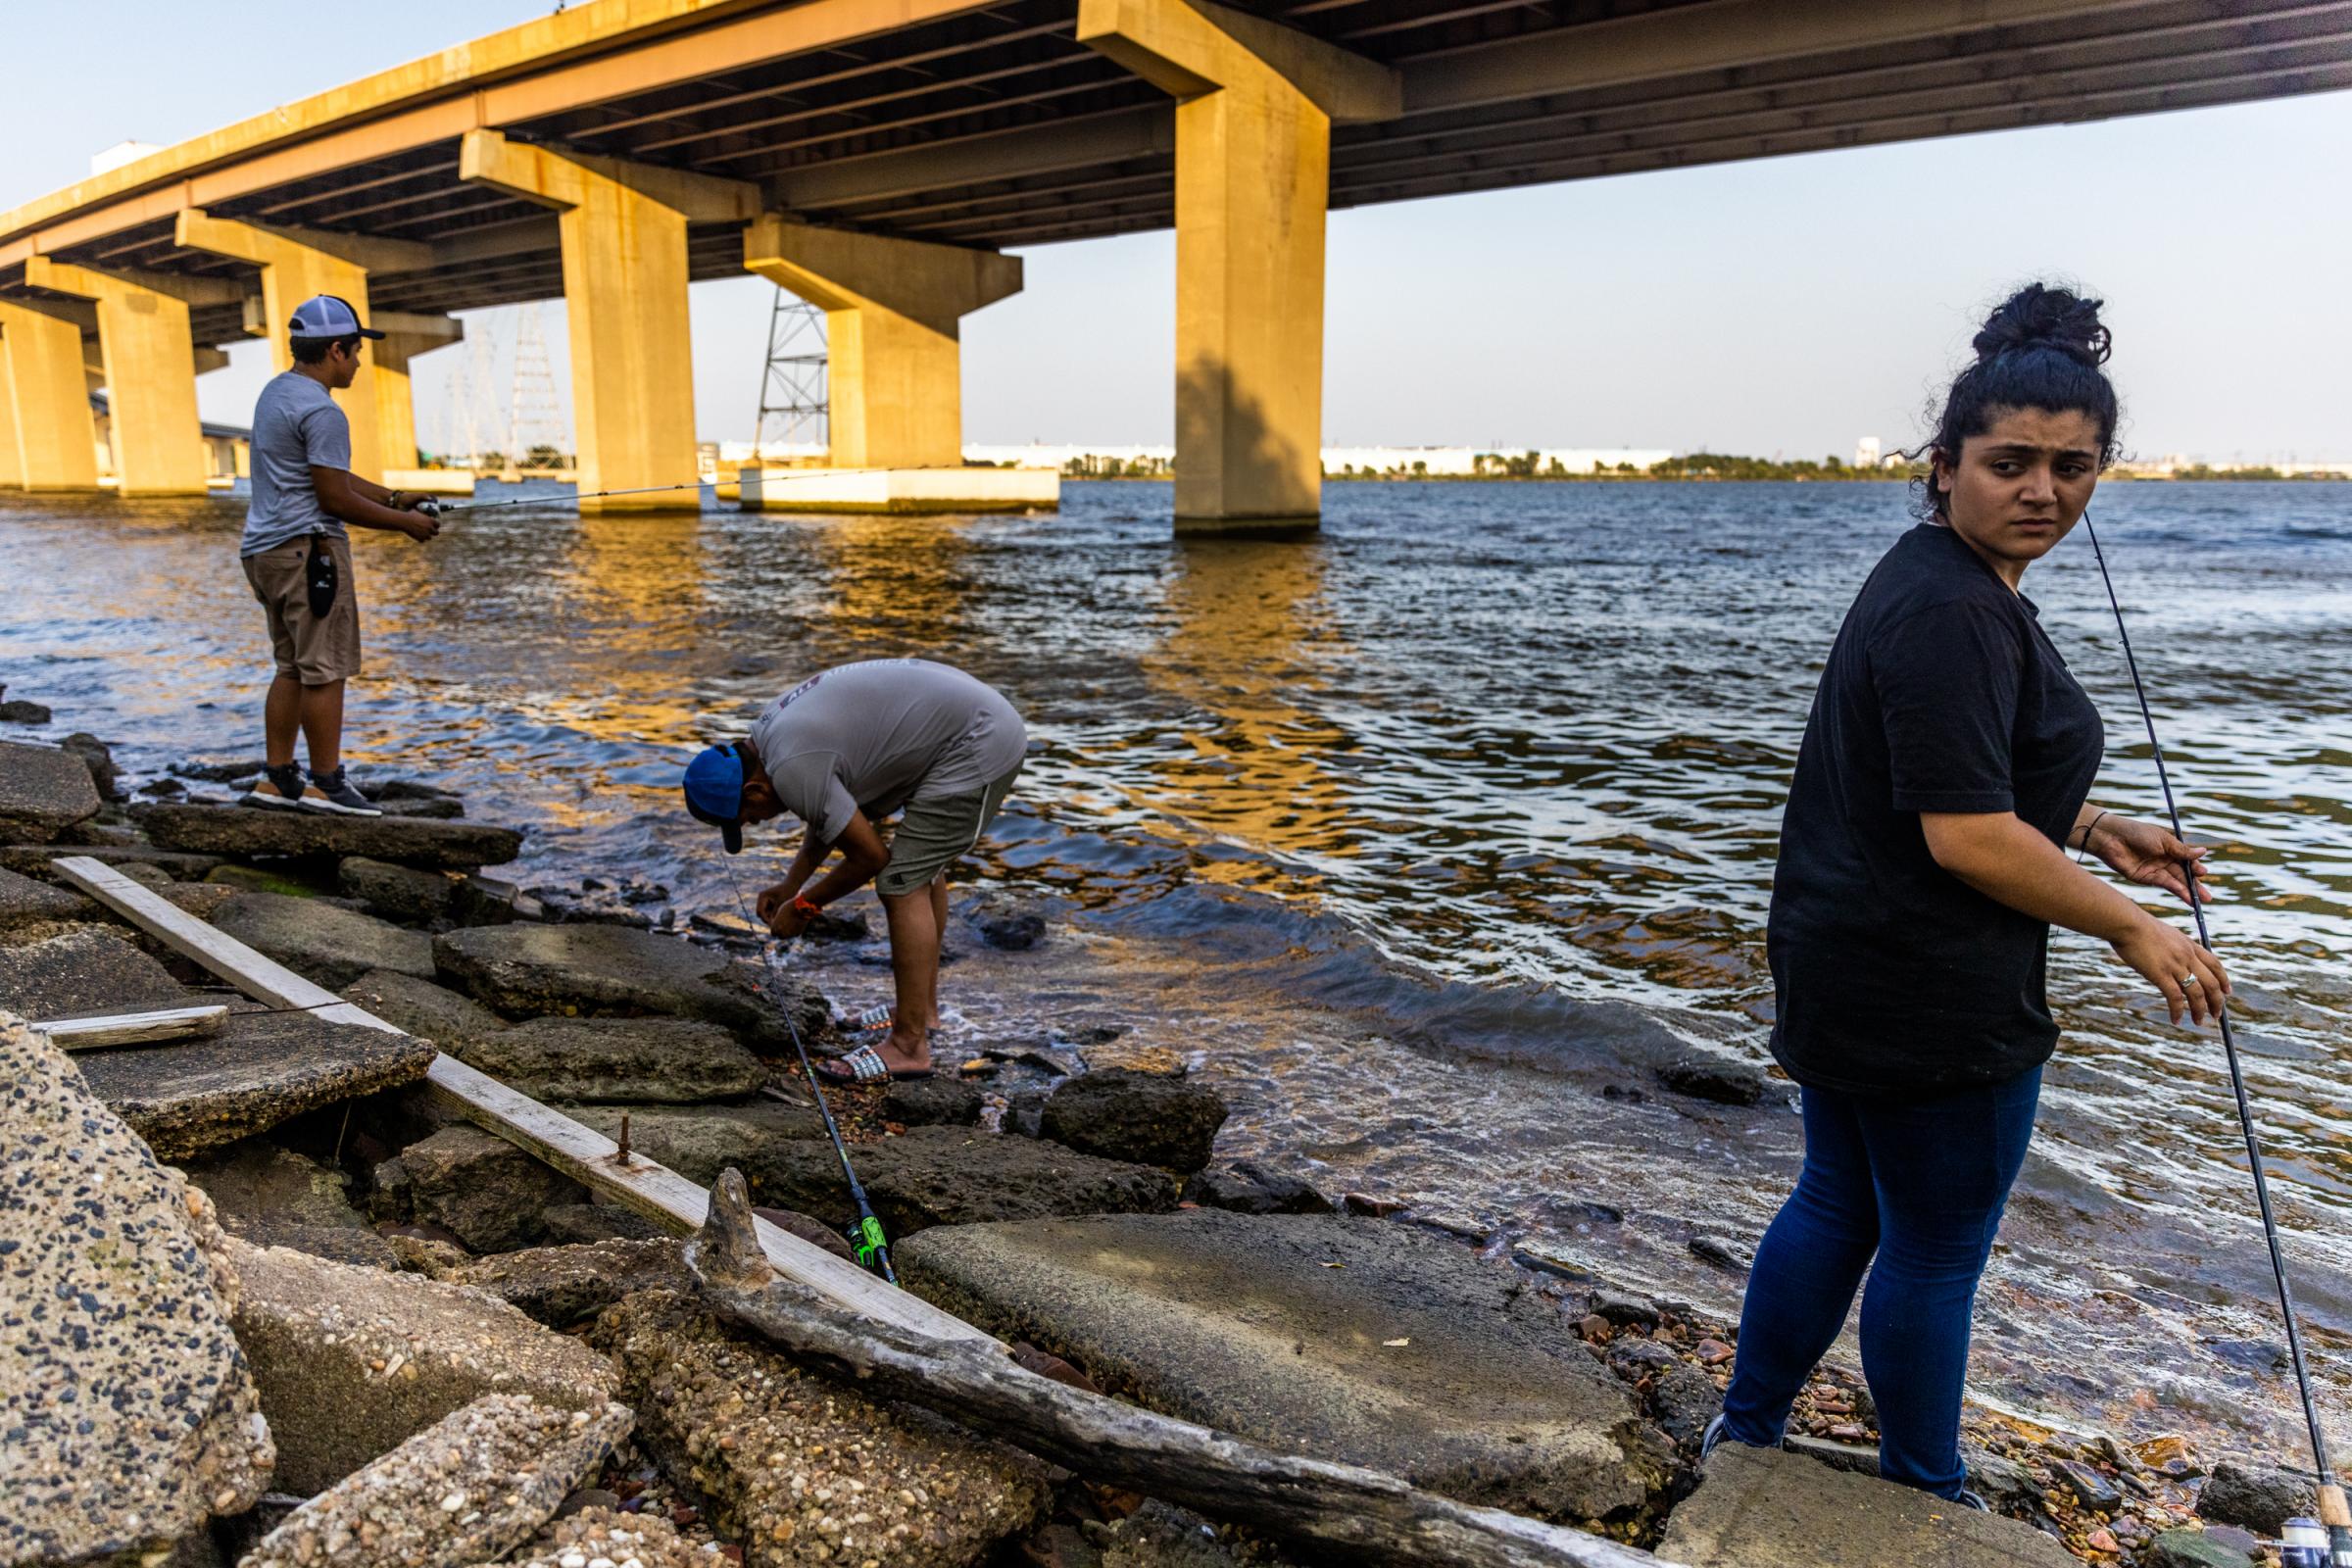 Erick Portillo, left, his father Angel Romero, center, and his sister Kayri Portillo fish in Bear Creek under the Francis Scott Key Bridge on July 16, 2021 at Fleming Park in Turner Station, Md. The family has lived in Turner Station for three years. &ldquo;This is something we like to do as a family,&rdquo; Kayri Portillo said. &ldquo;It&rsquo;s peaceful and quiet and really pretty.&rdquo;